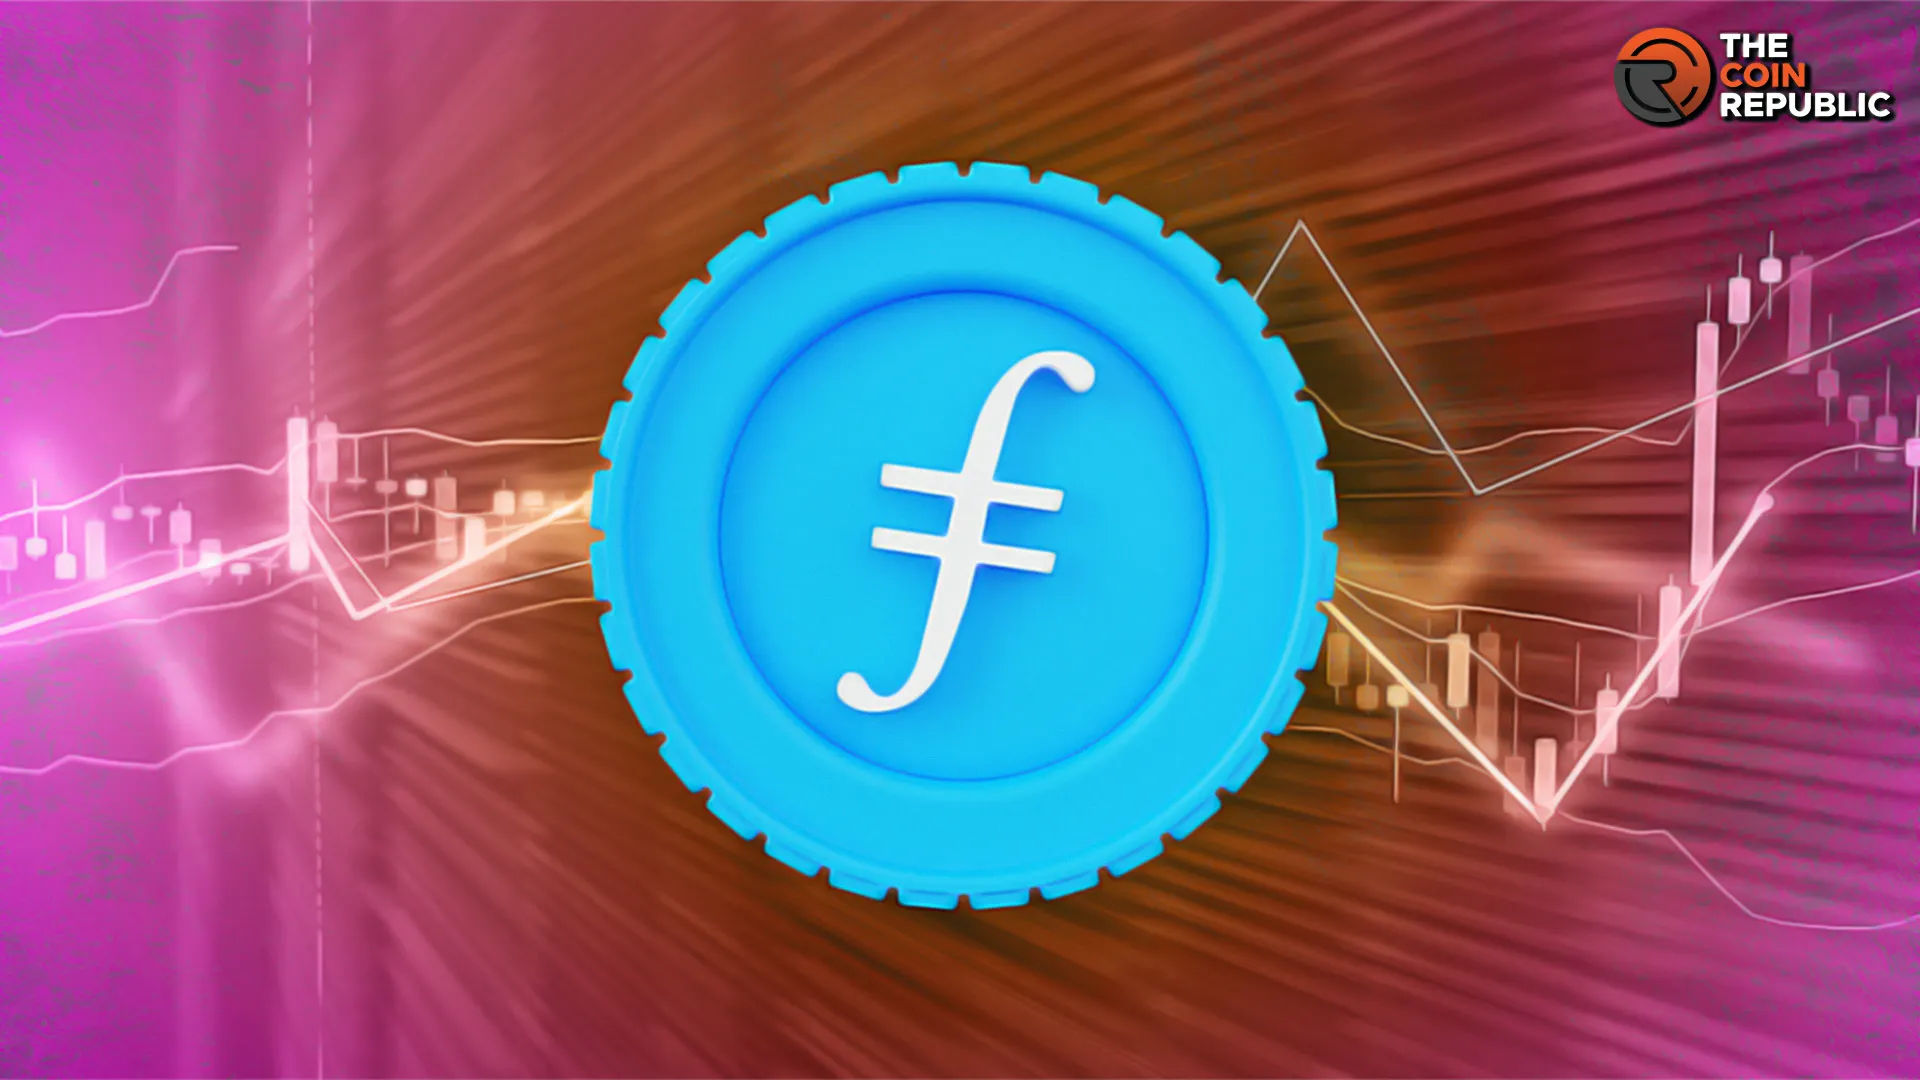 Filecoin Price Prediction: Will FIL Price See A Breakout To $10 Soon?